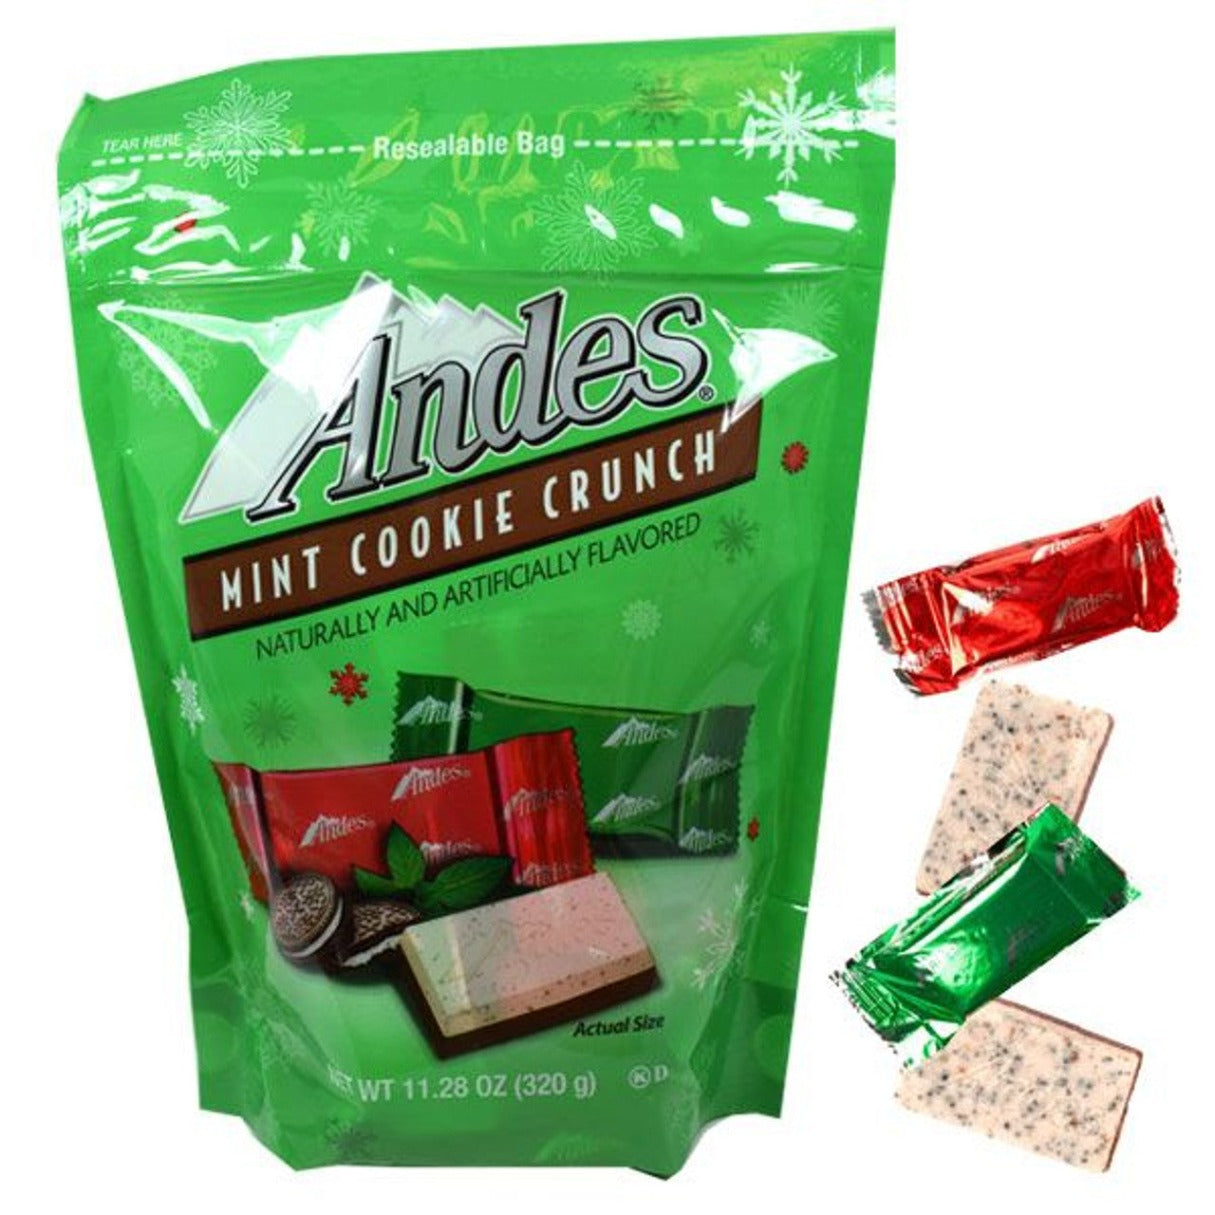 Andes Mints Cookie Crunch Holiday Bag 11.28oz - 12ct